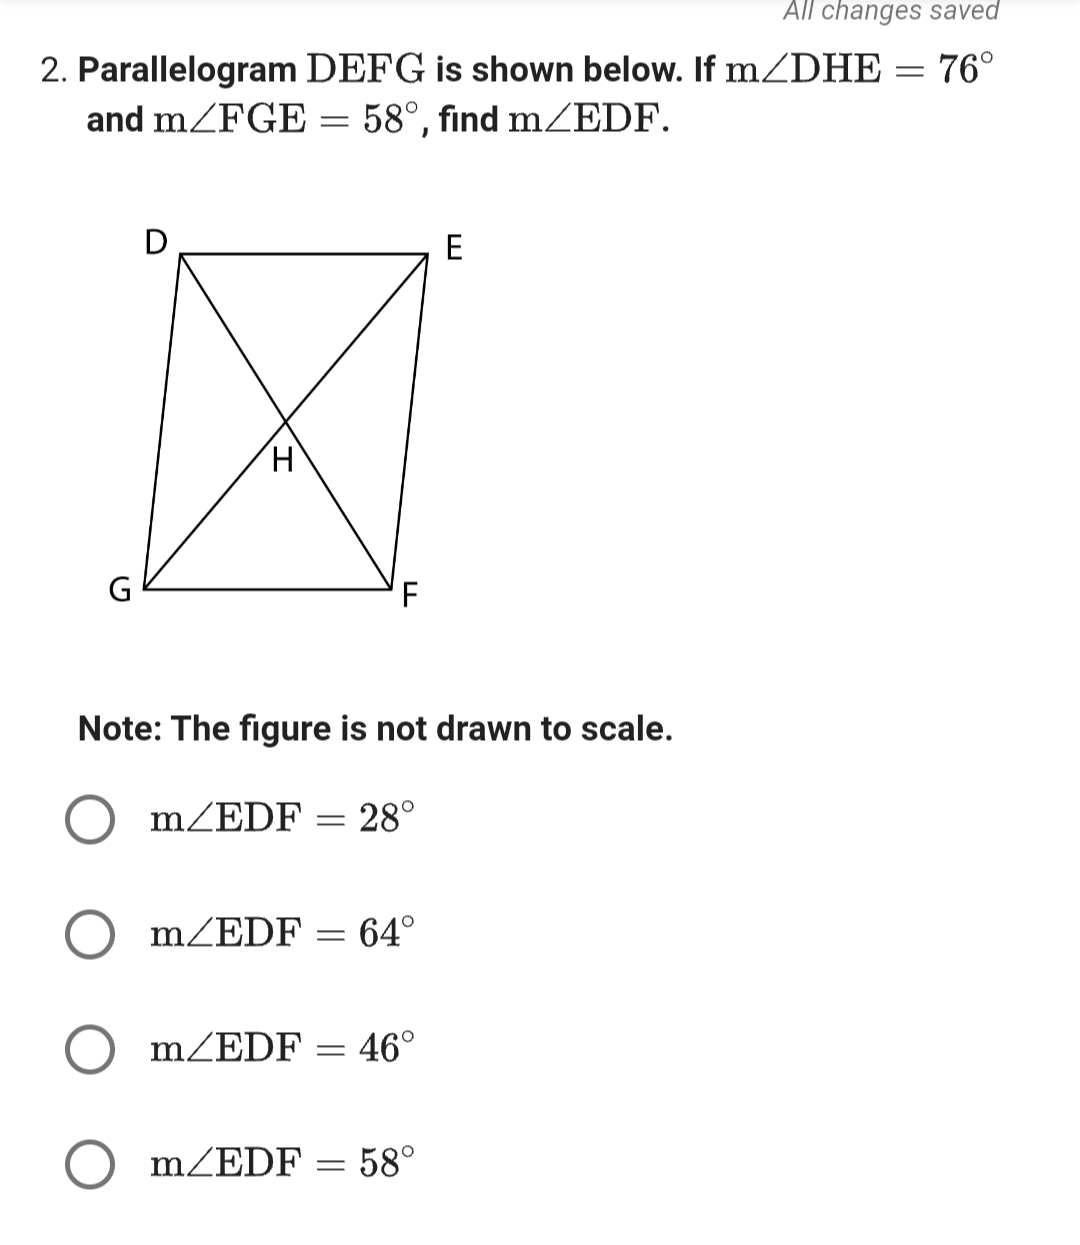 All changes saved
2. Parallelogram DEFG is shown below. If m/DHE = 76°
and m/FGE = 58°, find m/EDF.
D
H
m/EDF
Note: The figure is not drawn to scale.
m/EDF
=
m/EDF
m/EDF = 64°
F
=
=
28°
46°
E
58°